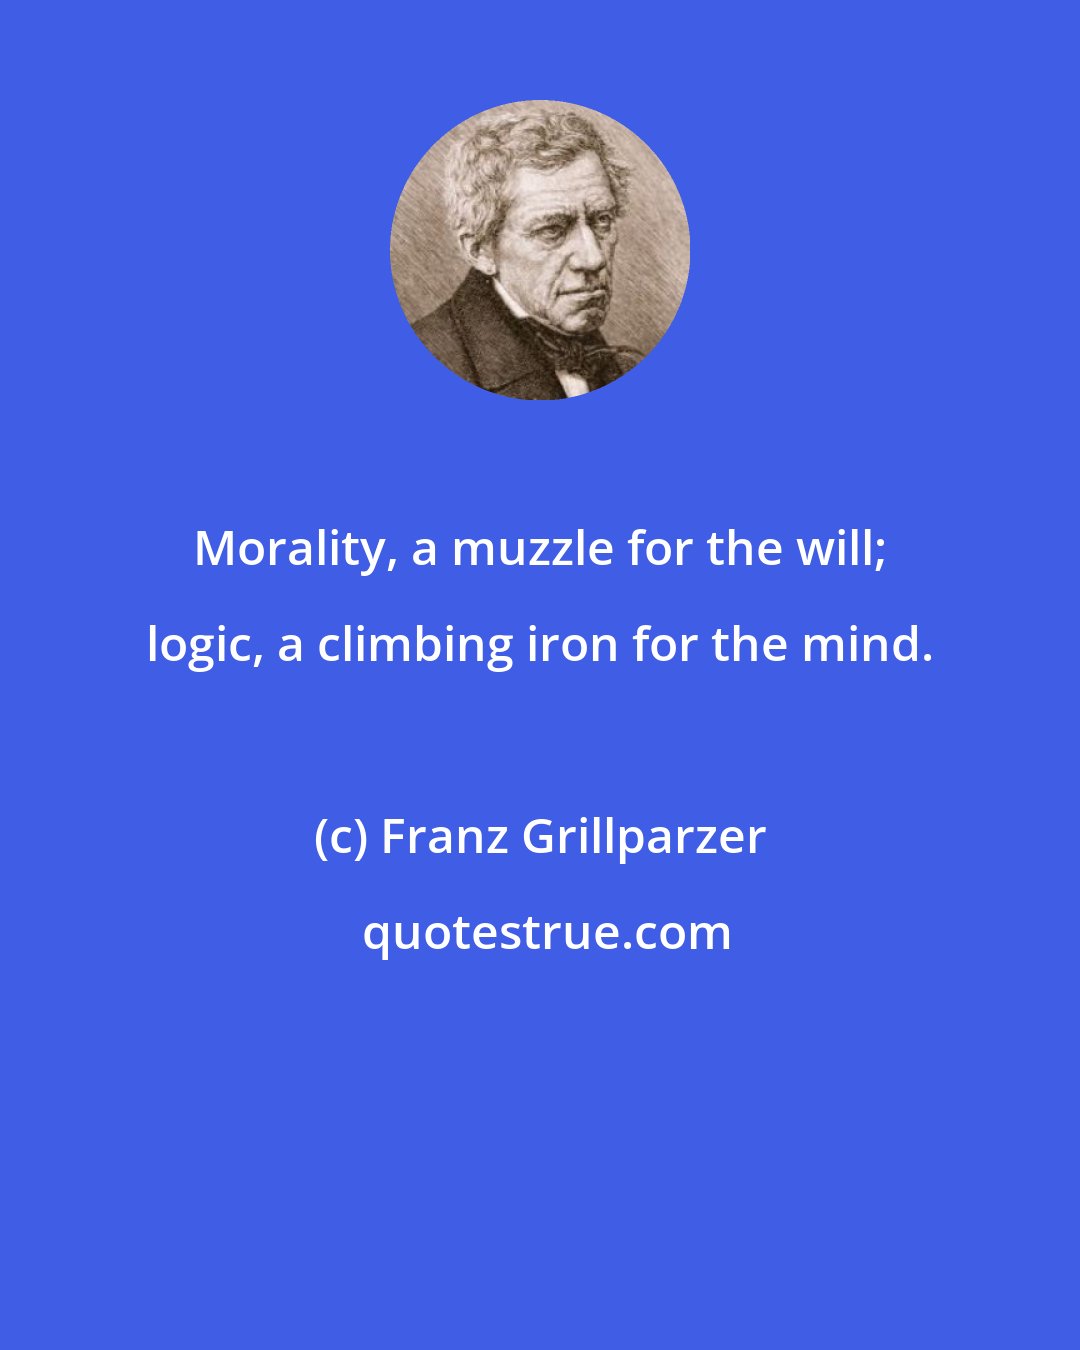 Franz Grillparzer: Morality, a muzzle for the will; logic, a climbing iron for the mind.